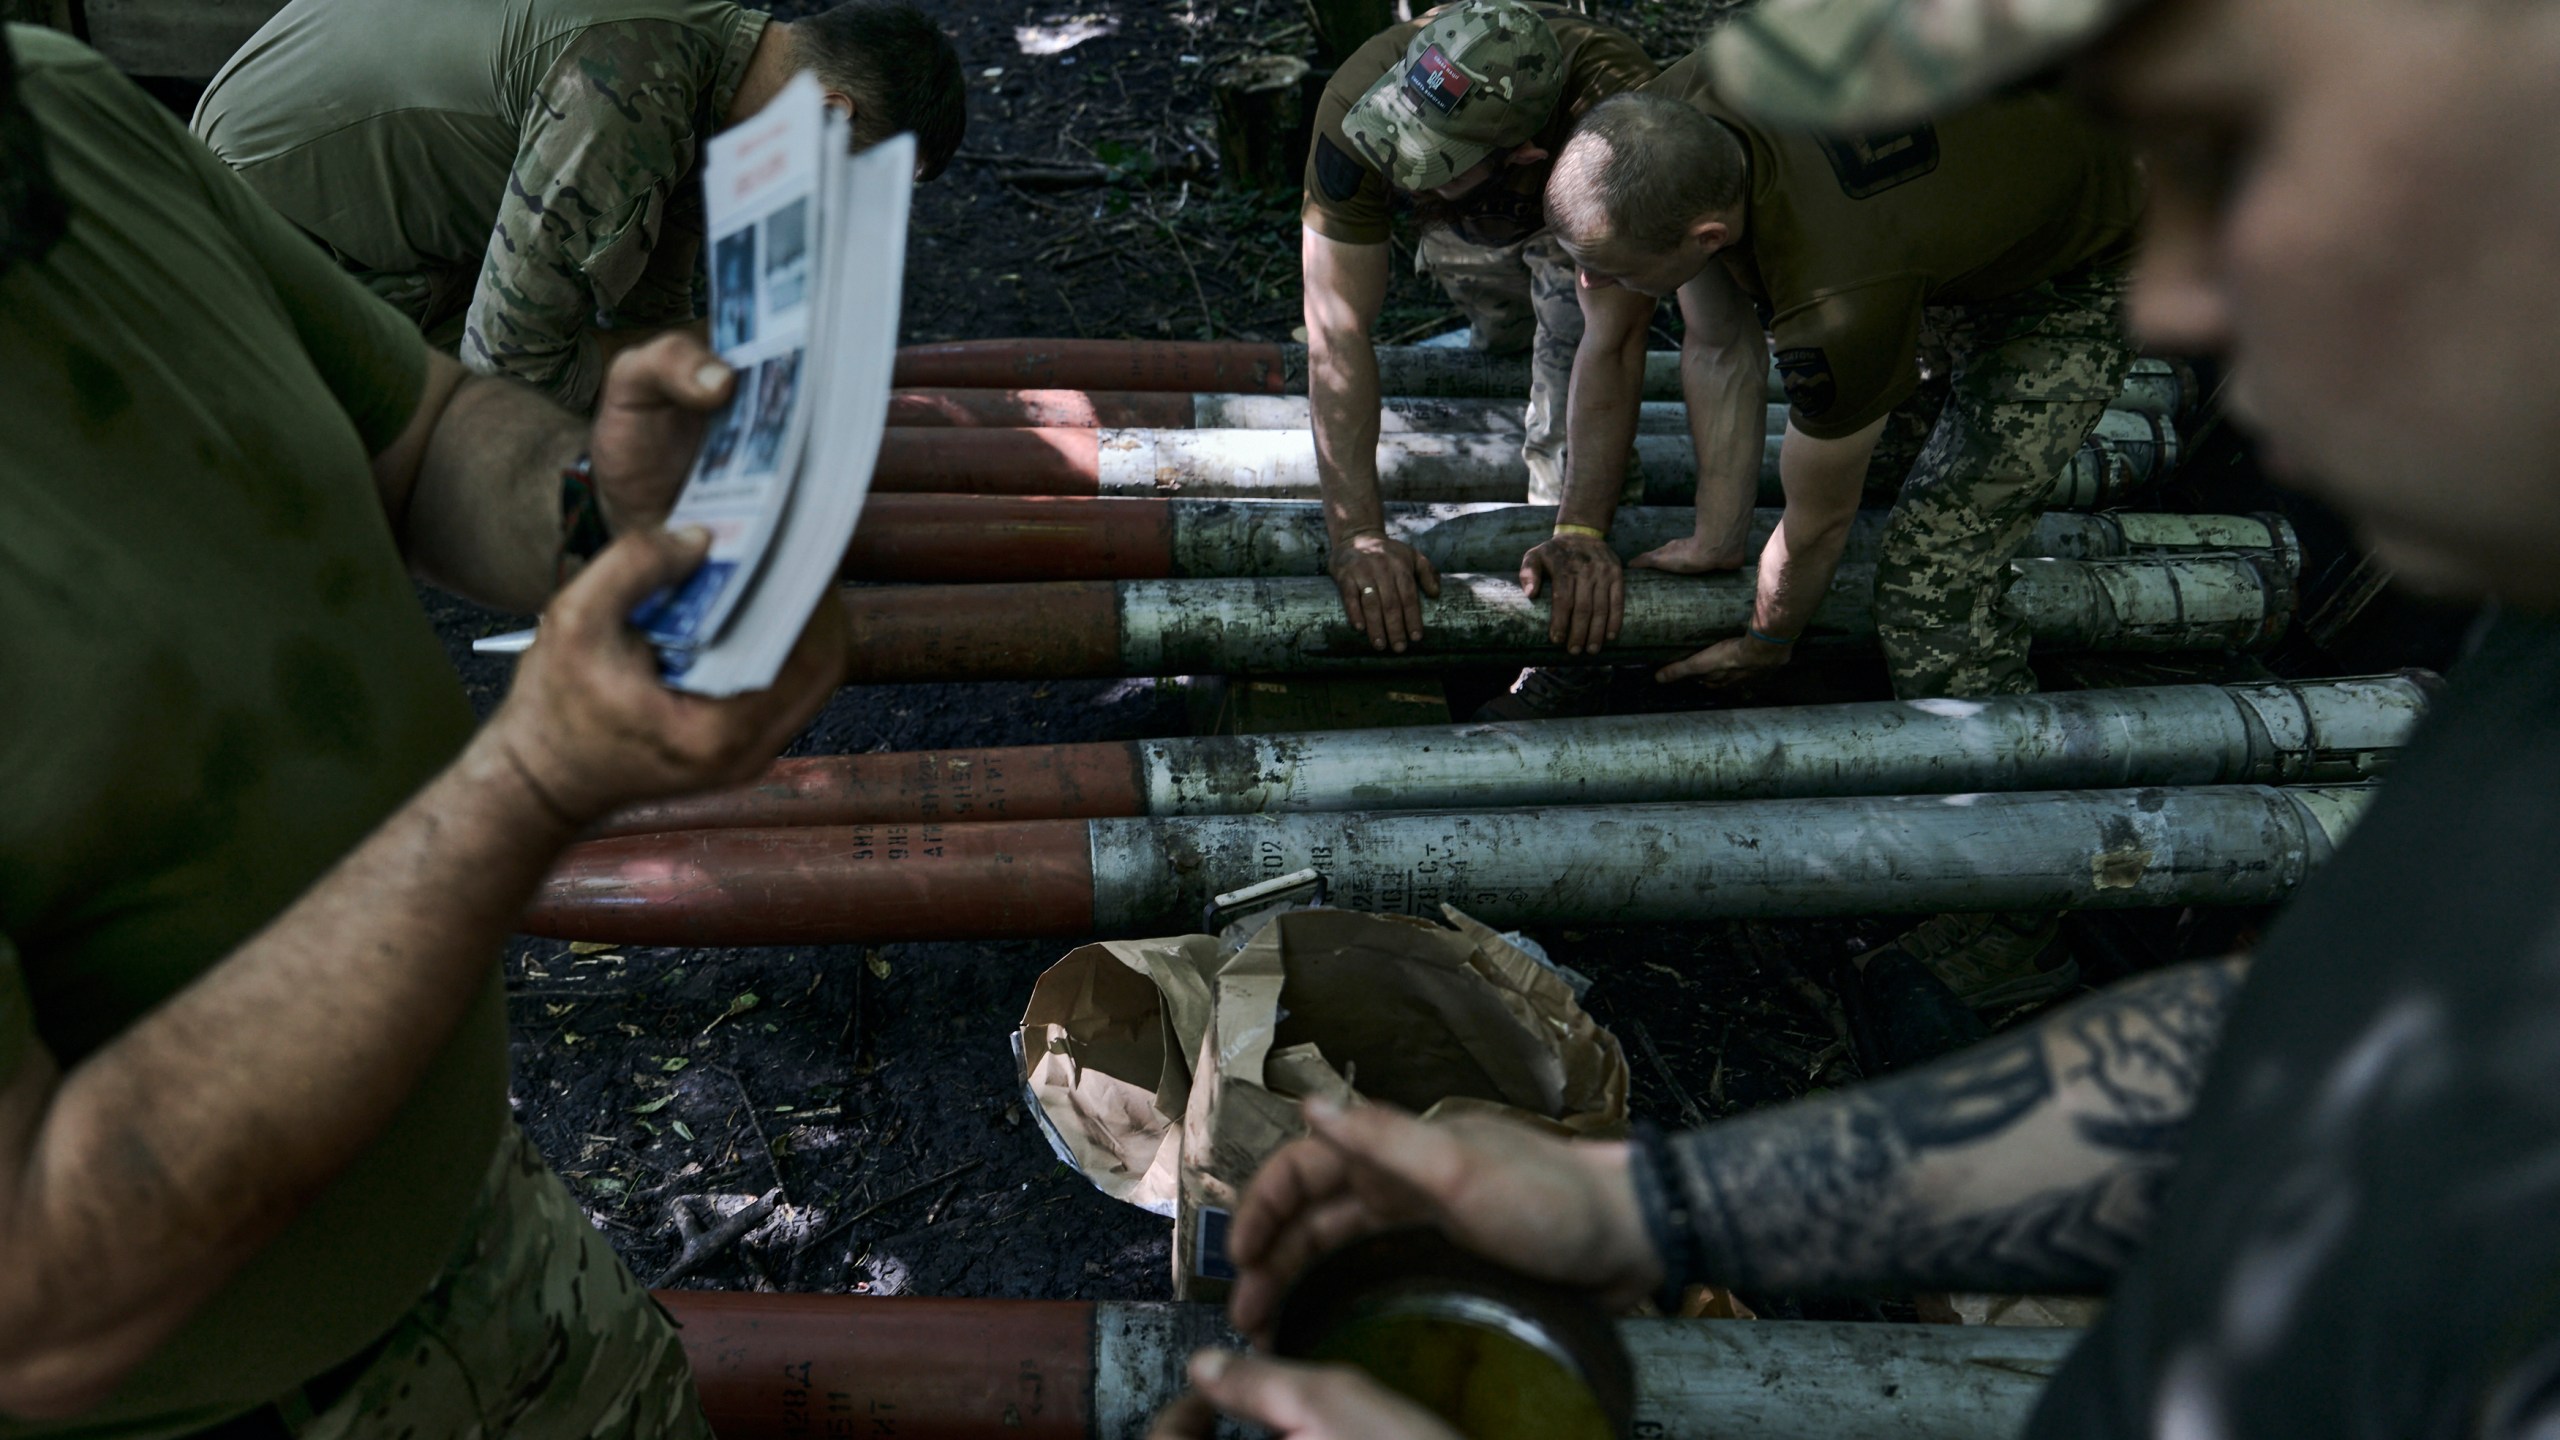 Ukrainian soldiers prepare shells with flyers urging the Russian soldiers to surrender to fire toward the Russian positions near Bakhmut, Donetsk region, Ukraine, Sunday, Aug. 13, 2023. (AP Photo/Libkos)